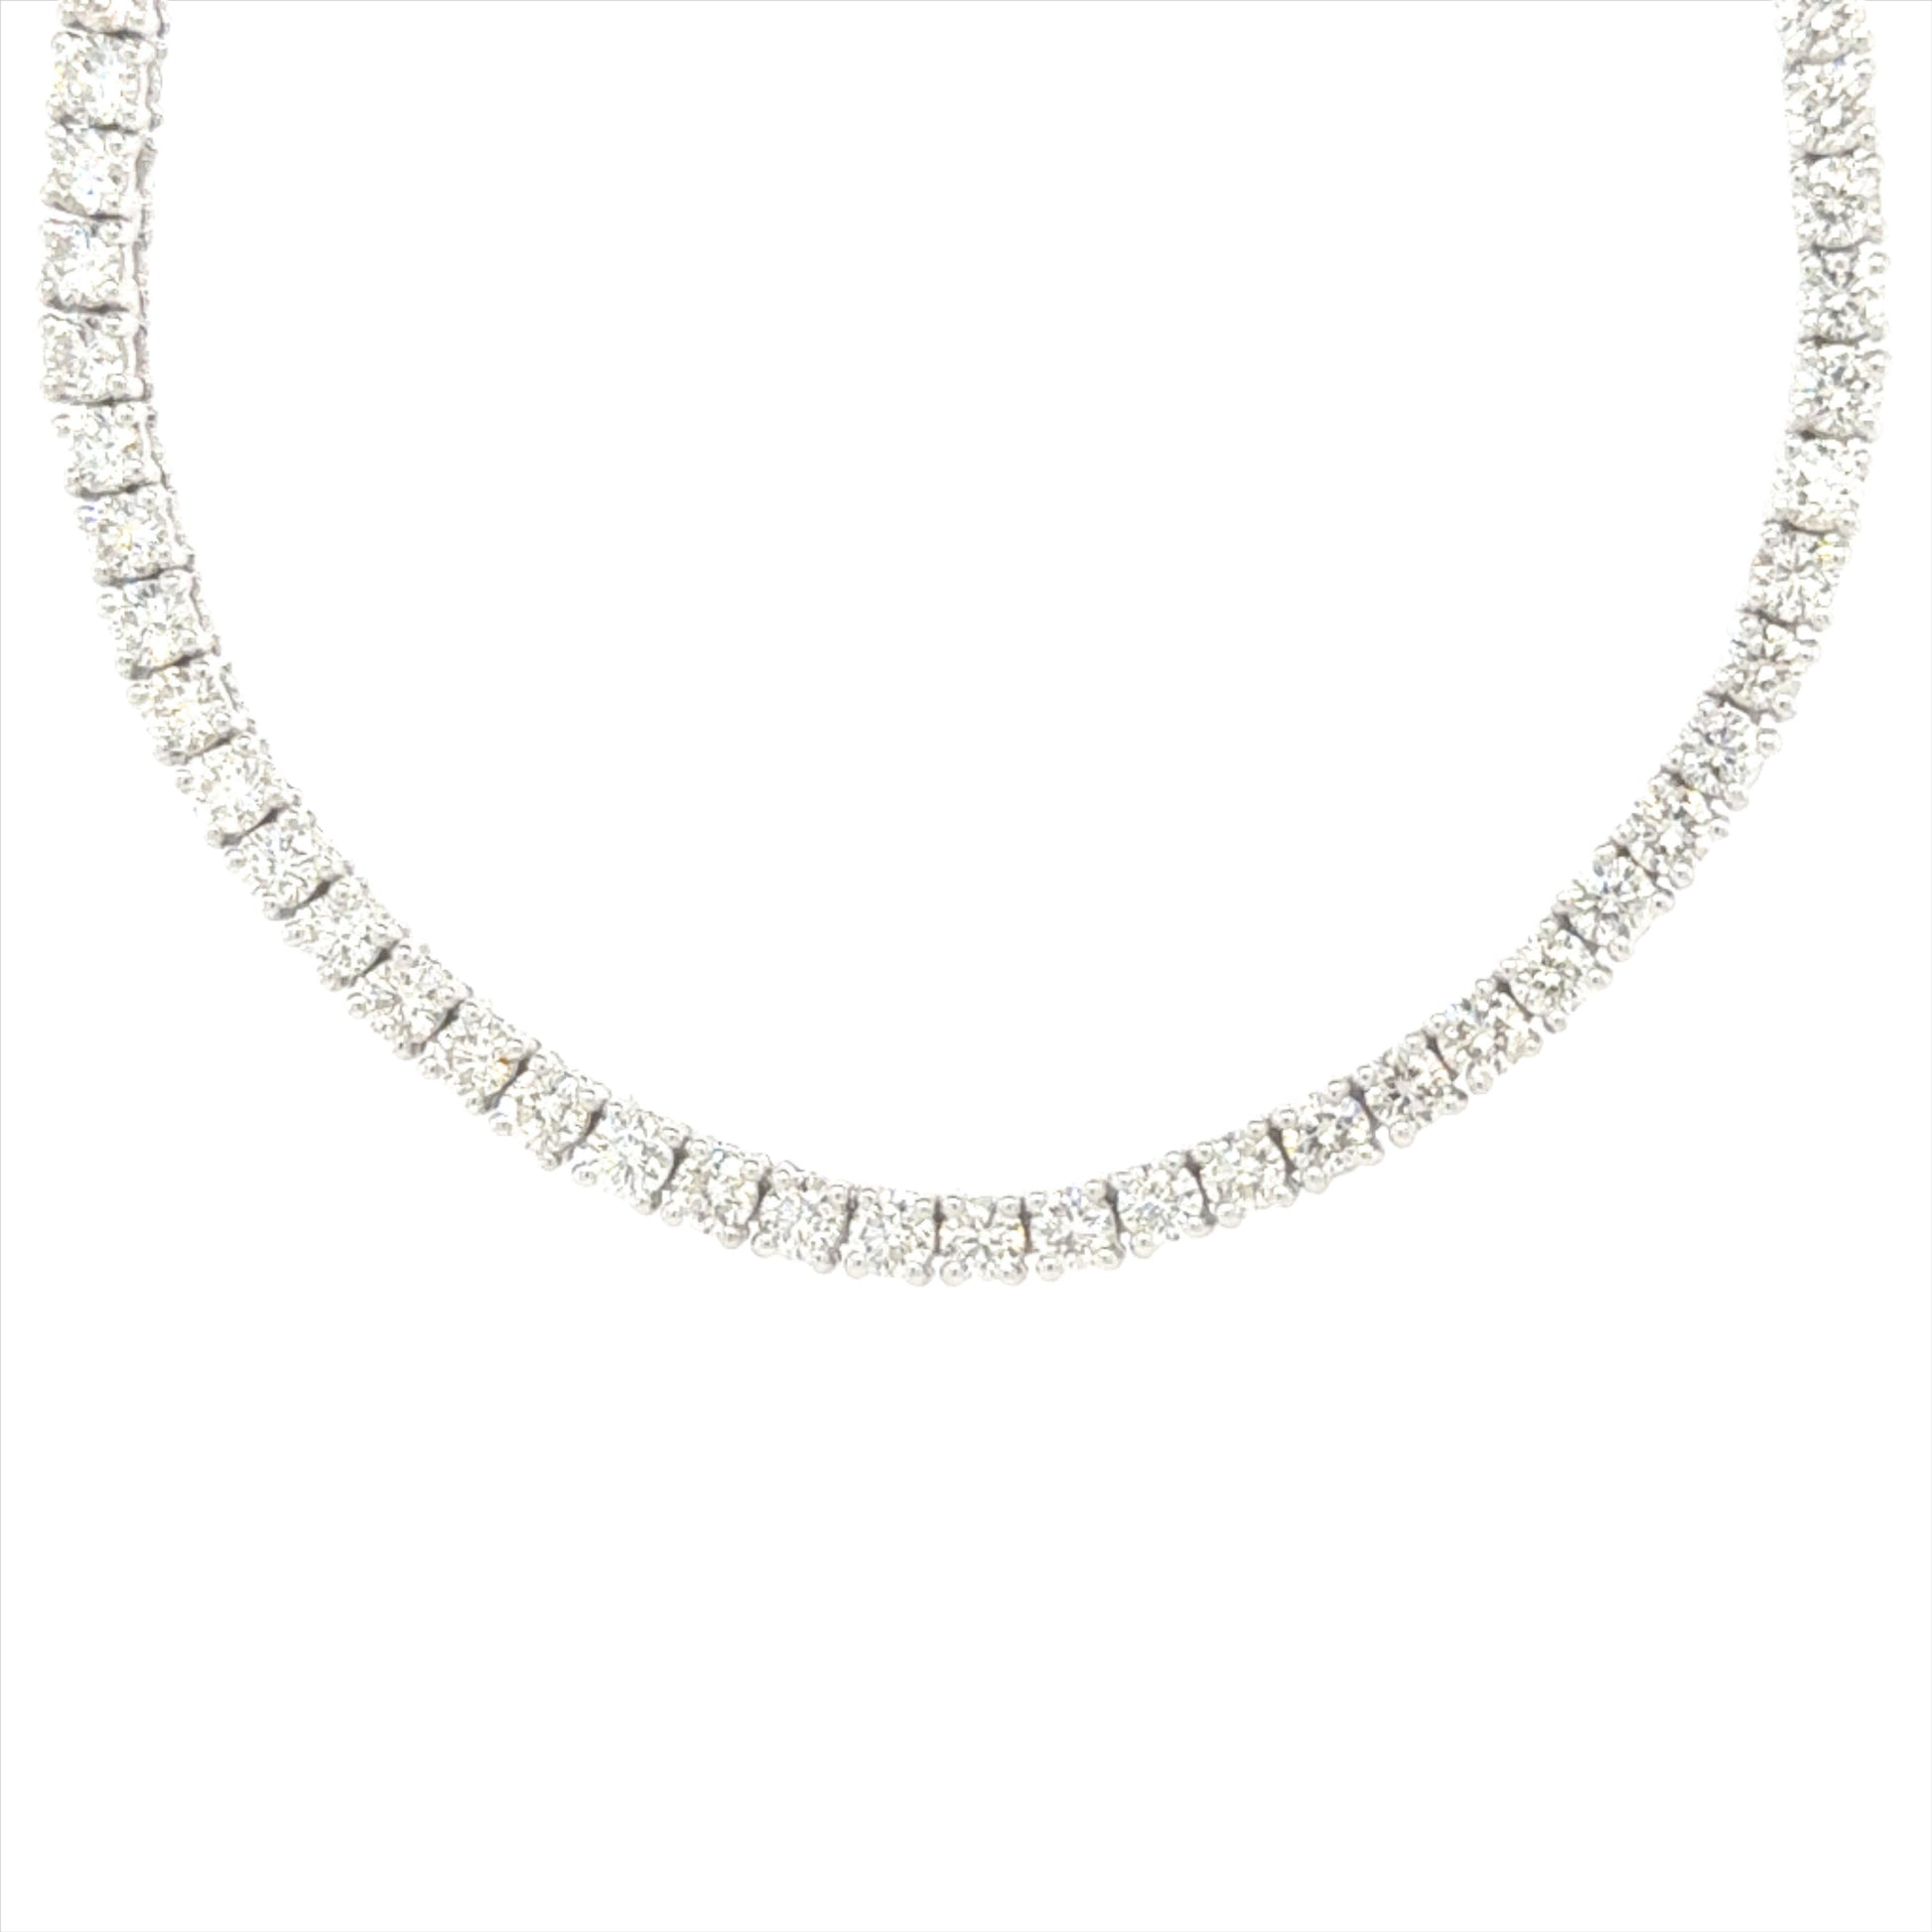 14K WHITE GOLD 18.18CT DIAMOND TENNIS NECKLACE Diamond CT: 18.18CT Diamond Clarity: VVS-VS Diamond Color: FG Gold K: 14K Length: 22 Inches Color: WHITE&nbsp;